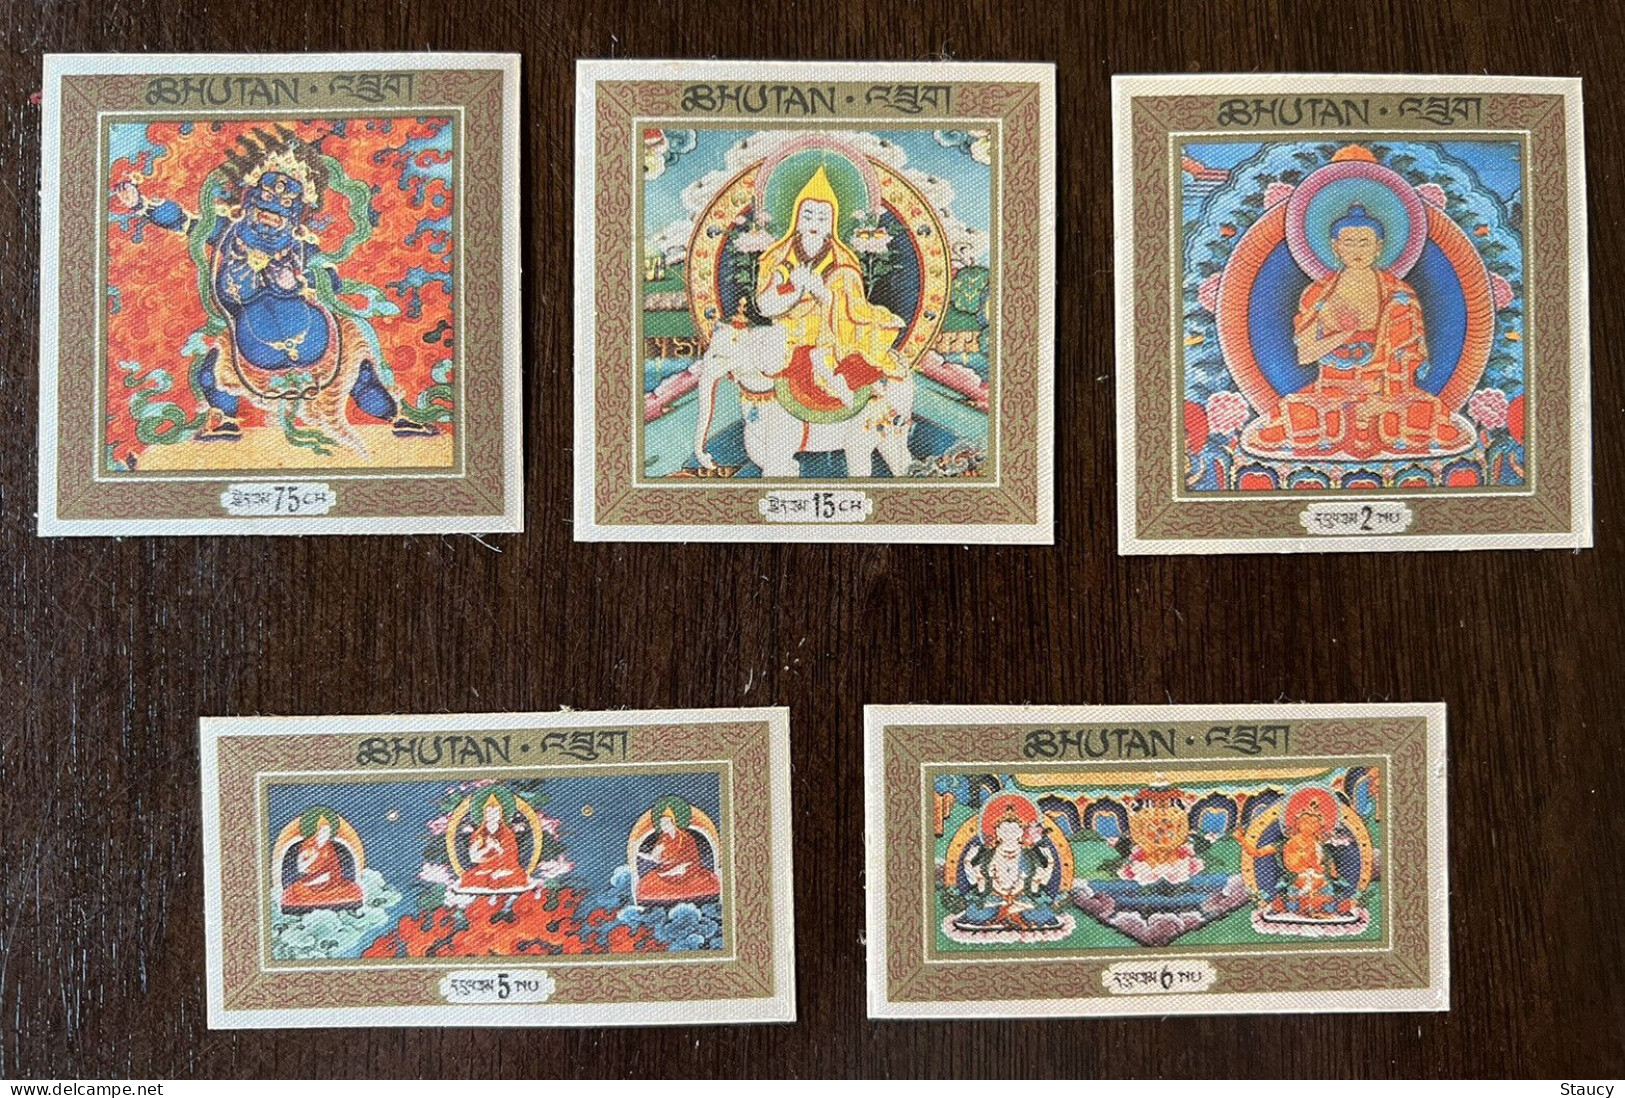 BHUTAN 1969 "Imperf" RELIGIOUS THANKA PAINTINGS BUDHA - SILK CLOTH Unique 5v Stamps SET "Imperf" MINT, As Per Scan - Buddhismus